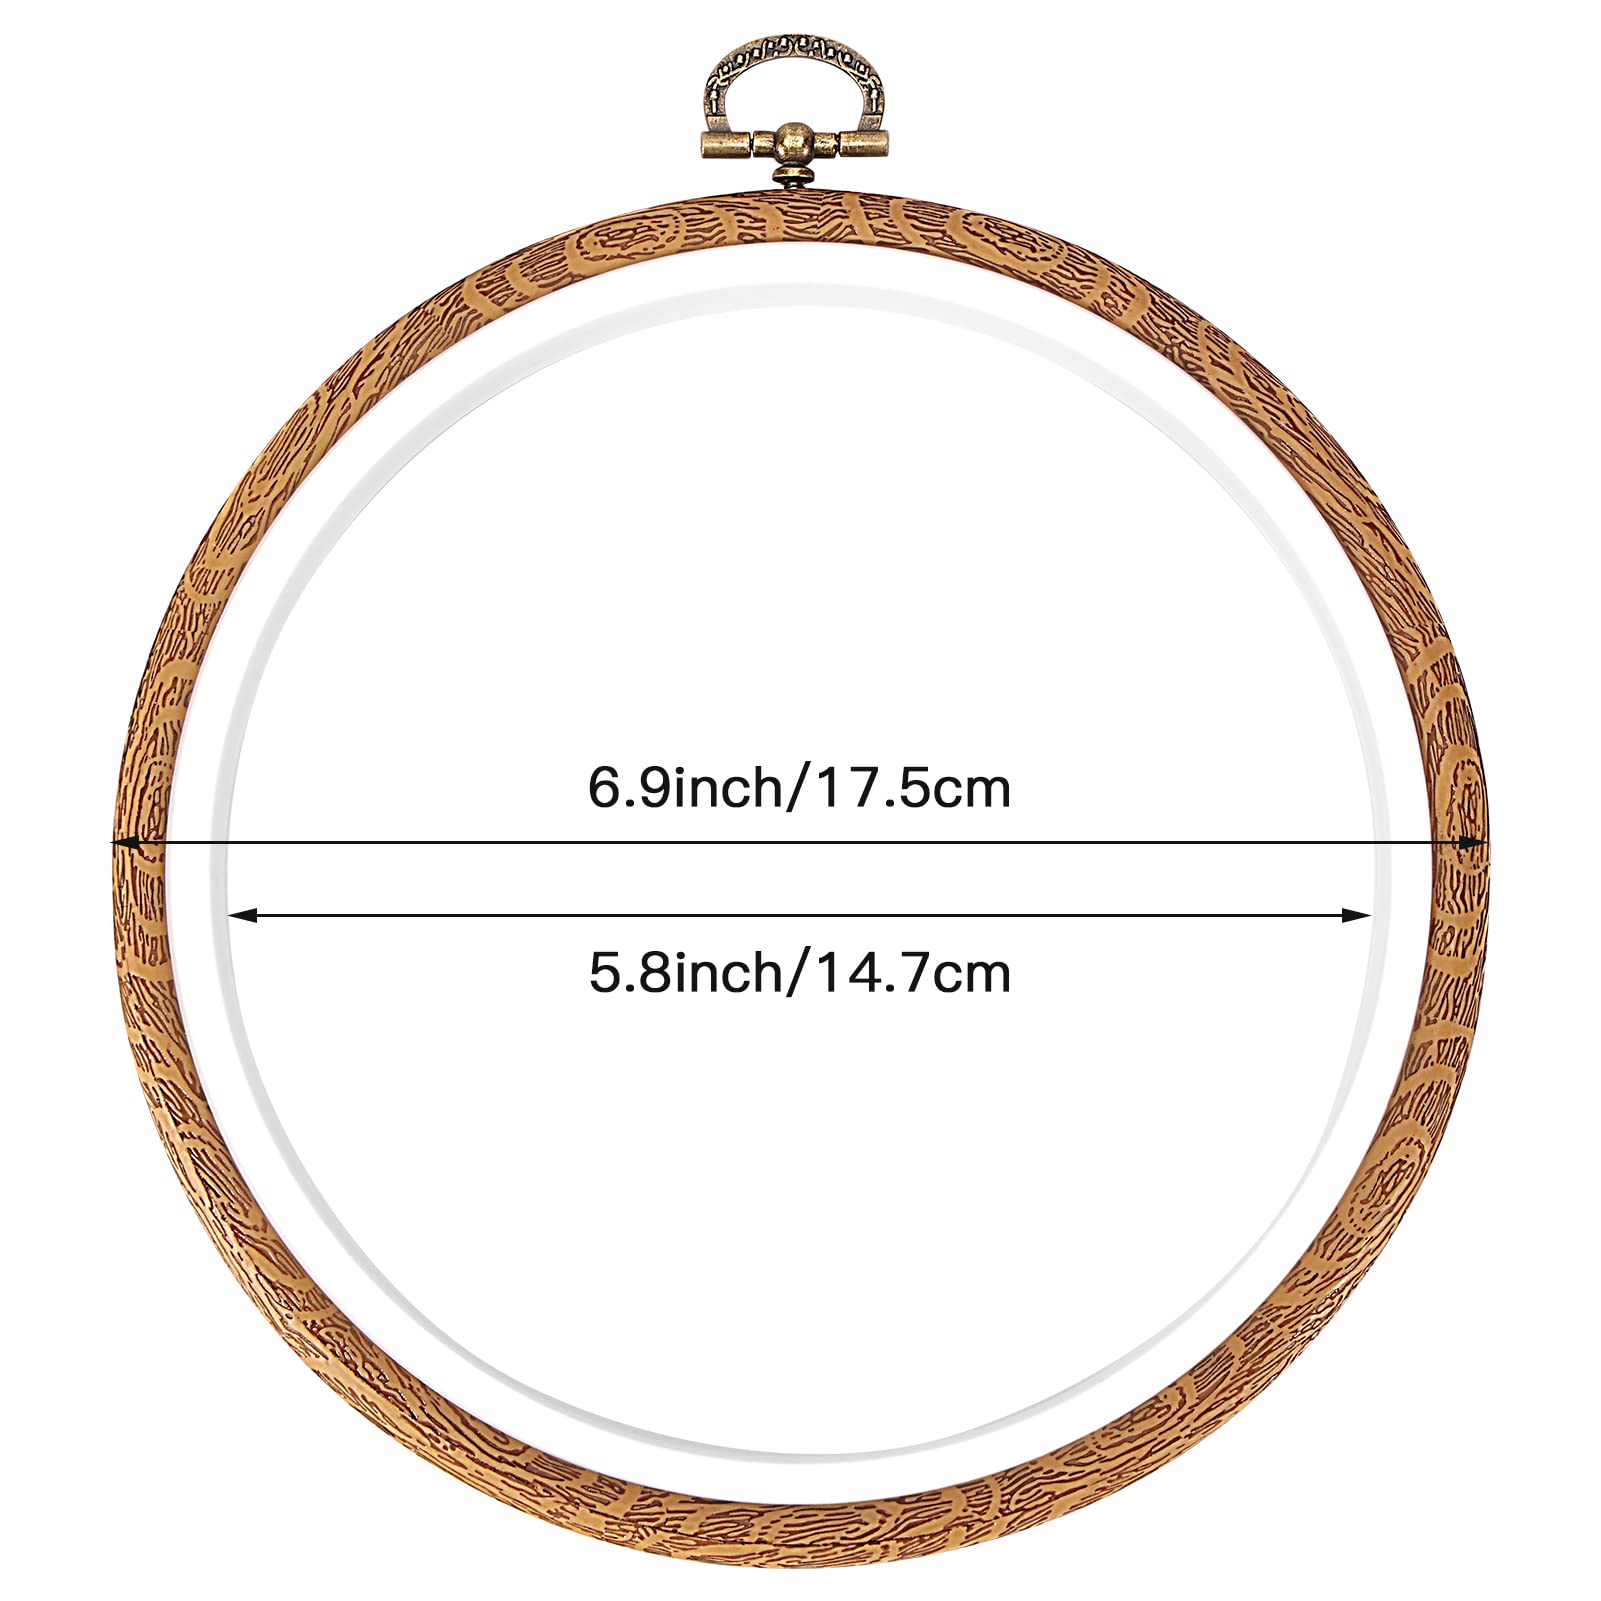 Pllieay 3 Pieces 6.9inch Embroidery Hoops Imitated Wood Embroidery Circle Round Display Frame Ring Cross Stitch Hoops for Art Craft Sewing and Hangin